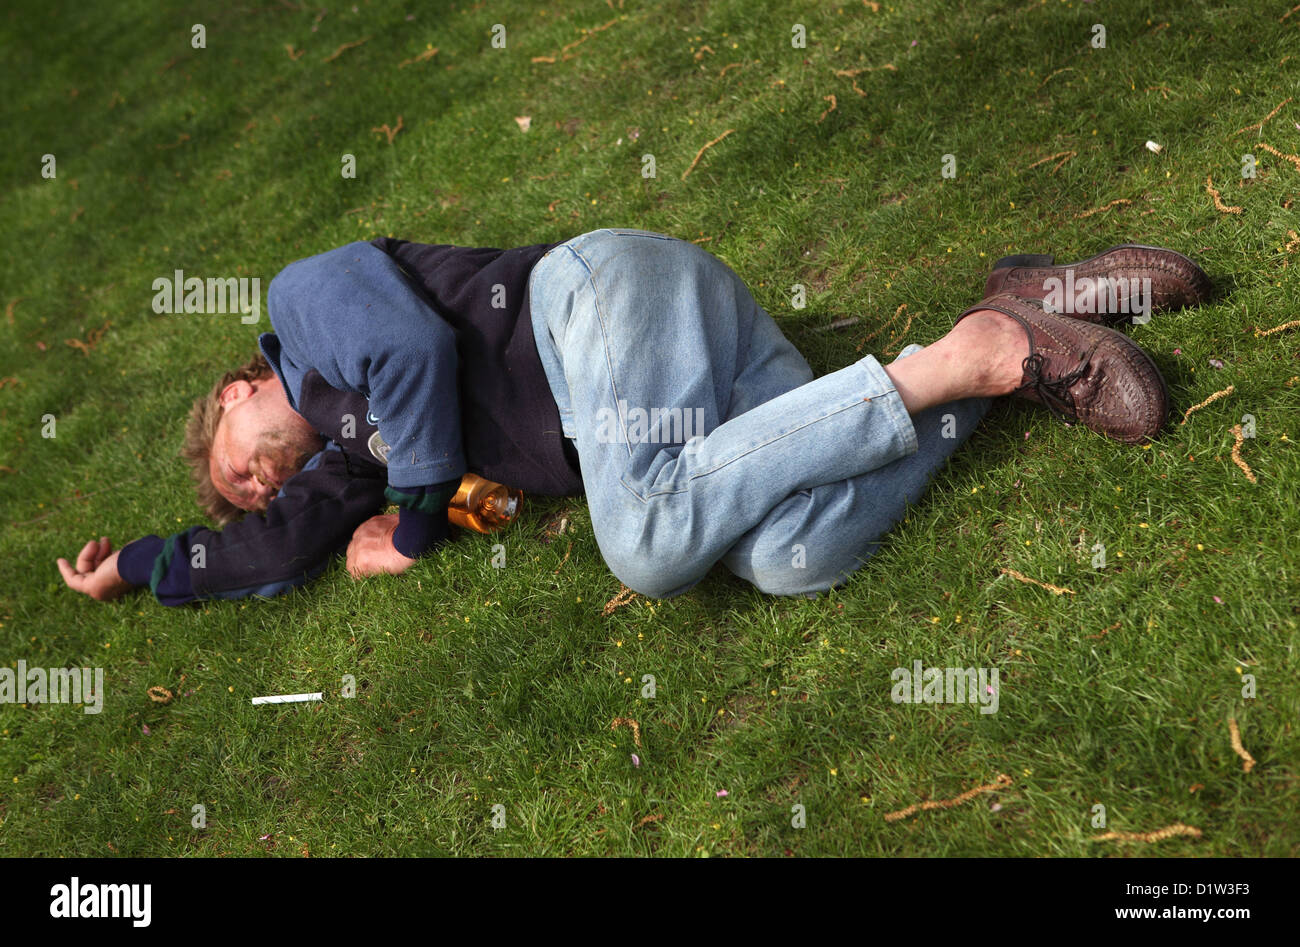 budapest-hungary-symbol-poverty-a-man-is-sleeping-on-the-grass-D1W3F3.jpg